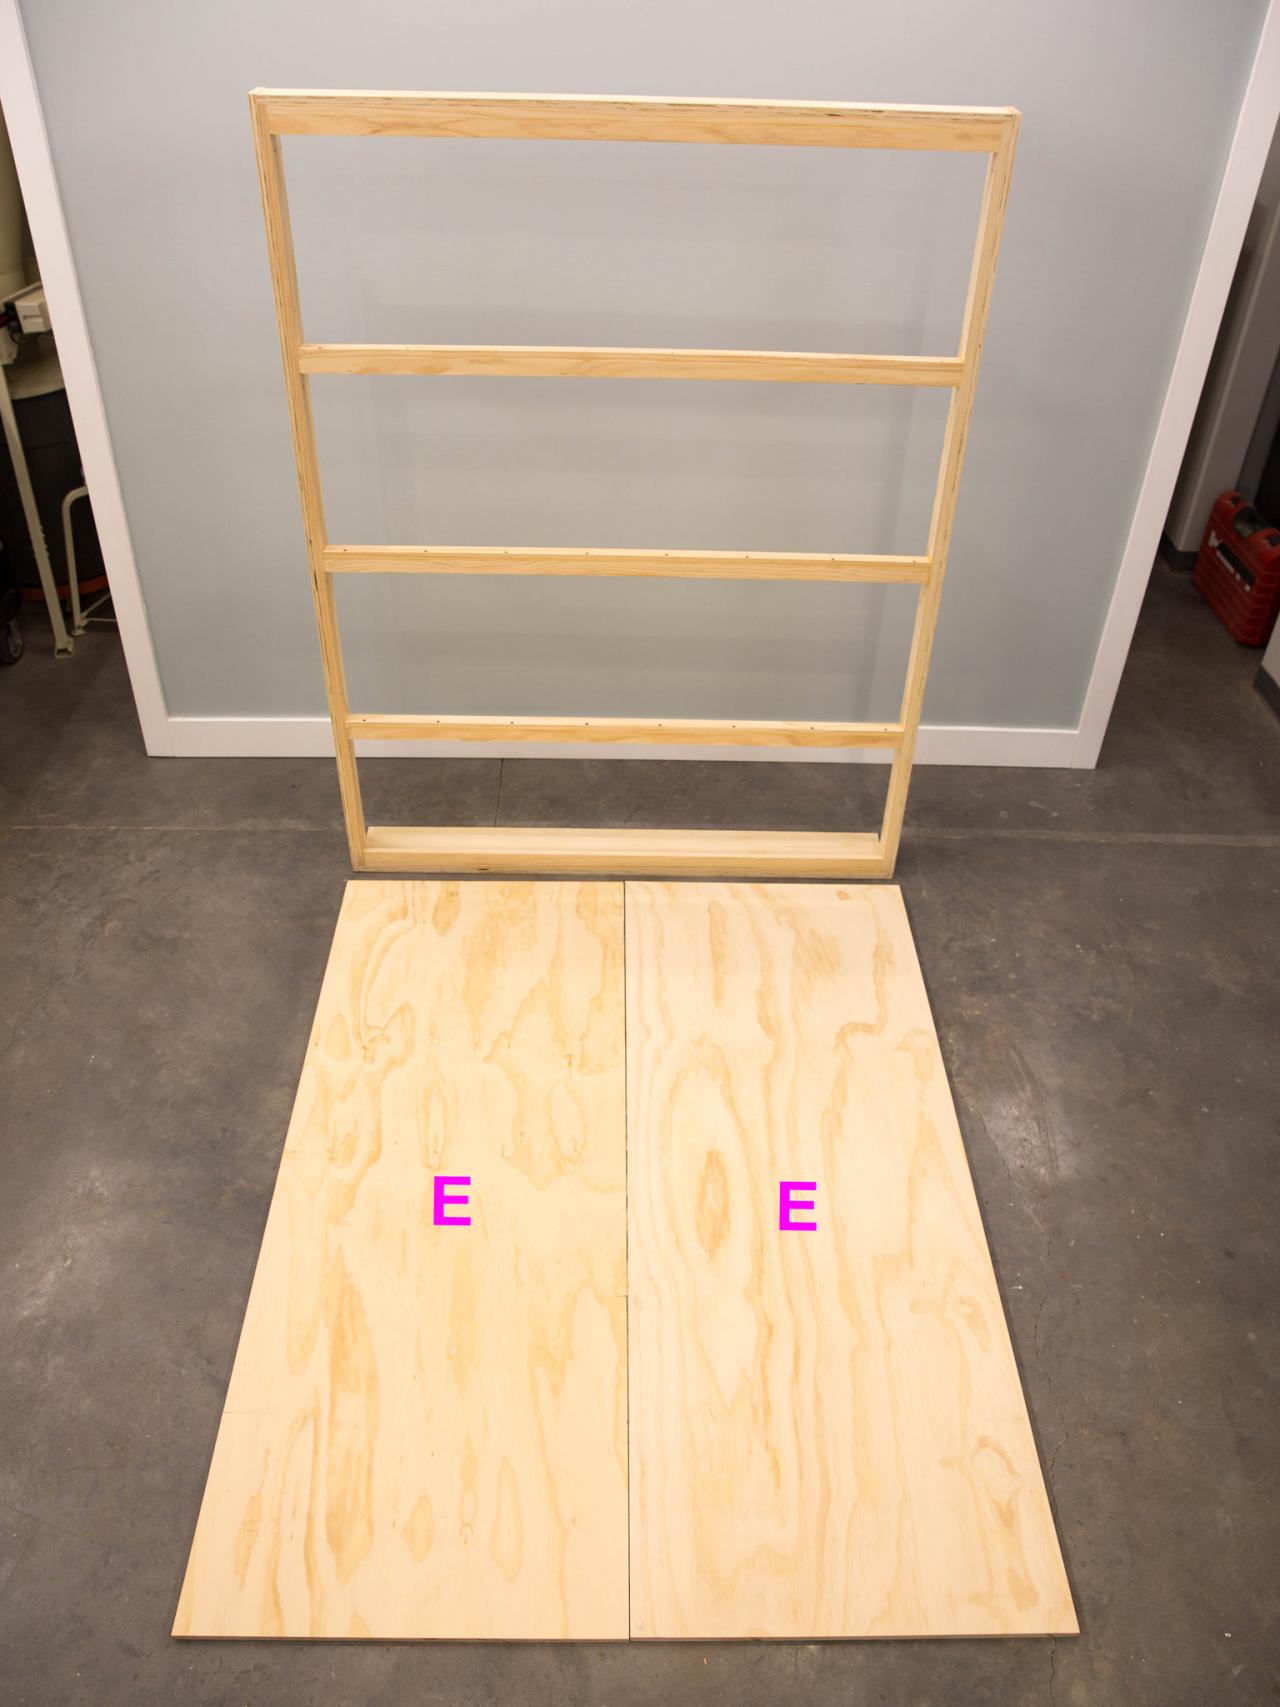 How To Build A Murphy Bed, Plans To Build Your Own Murphy Bed